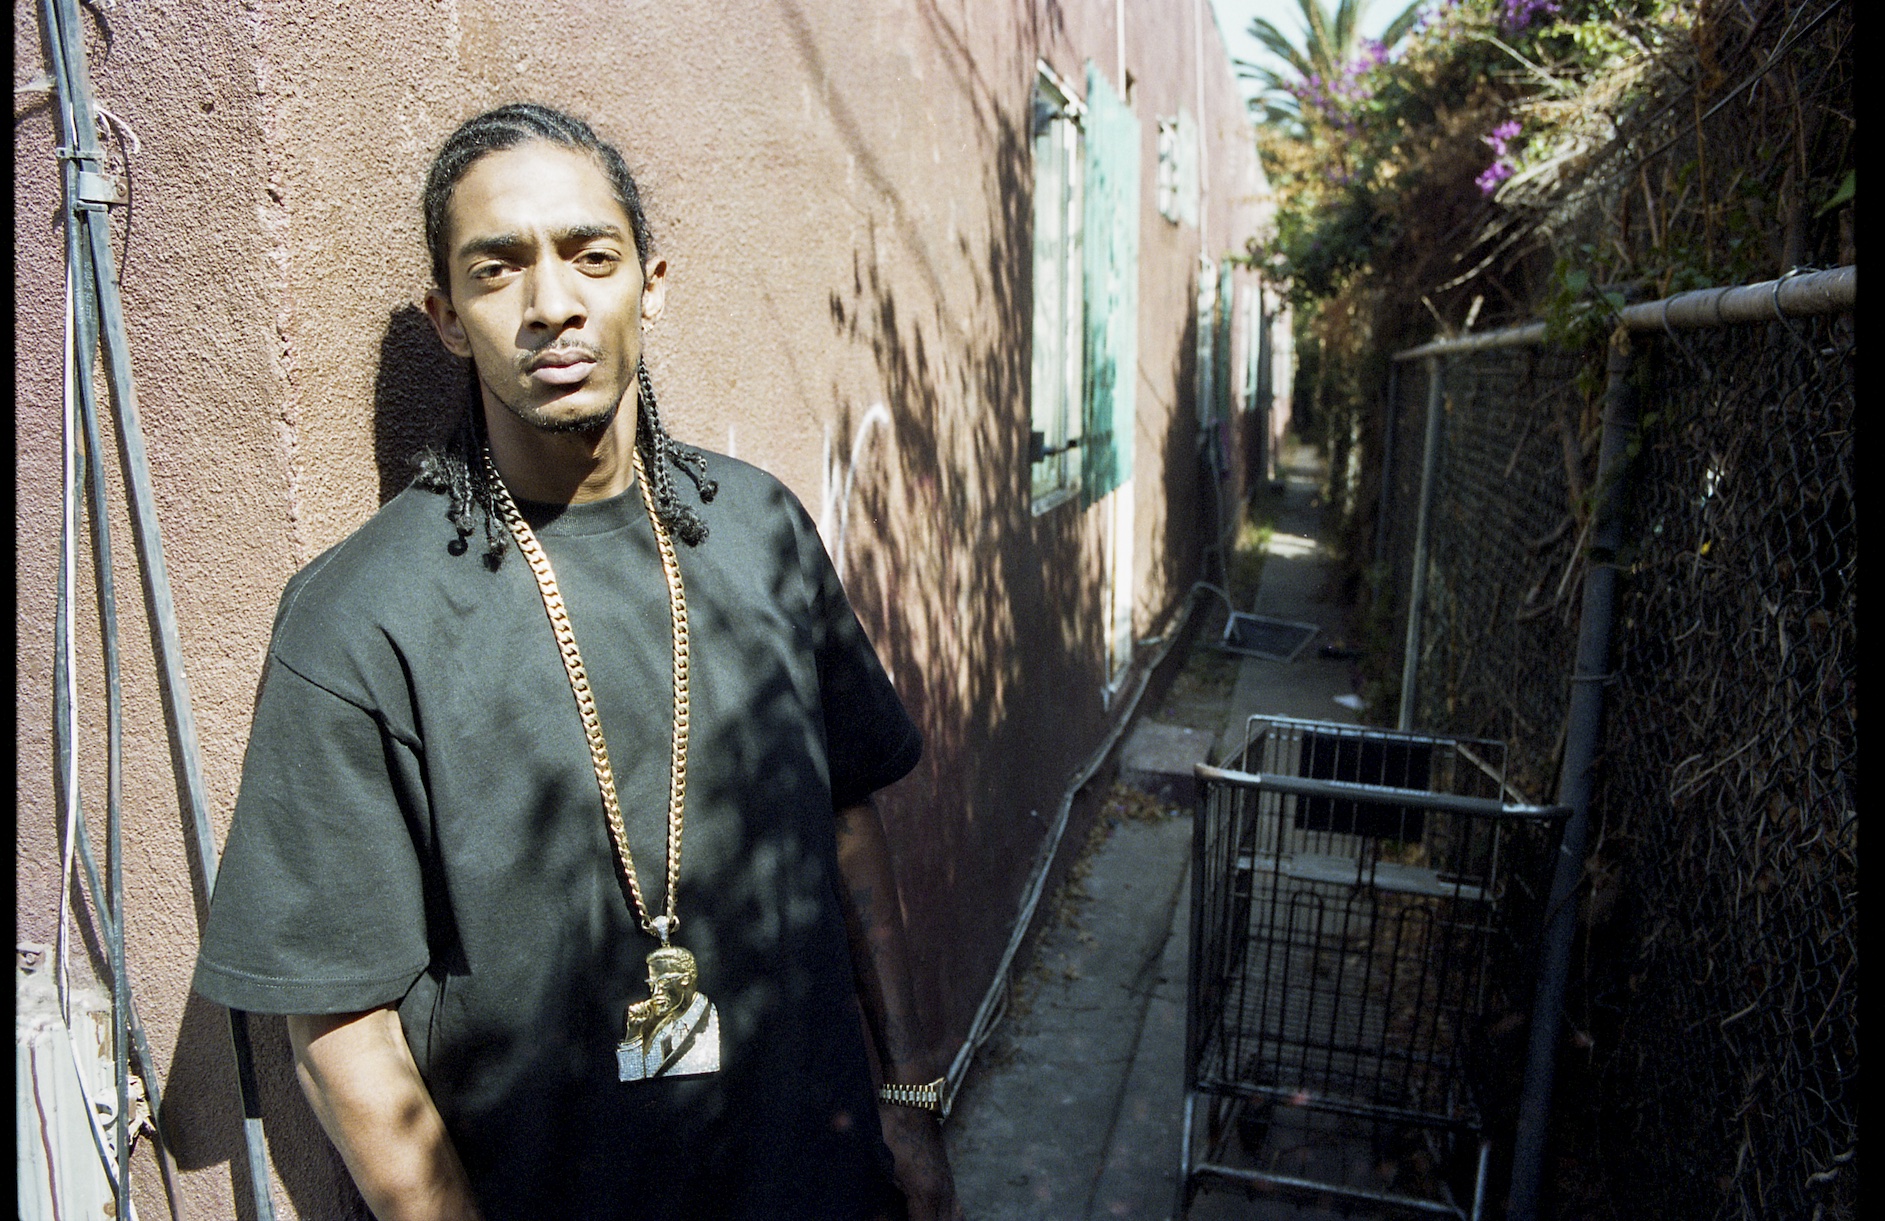 FLOOD - Nipsey Hussle: The Legacy of a Mentality